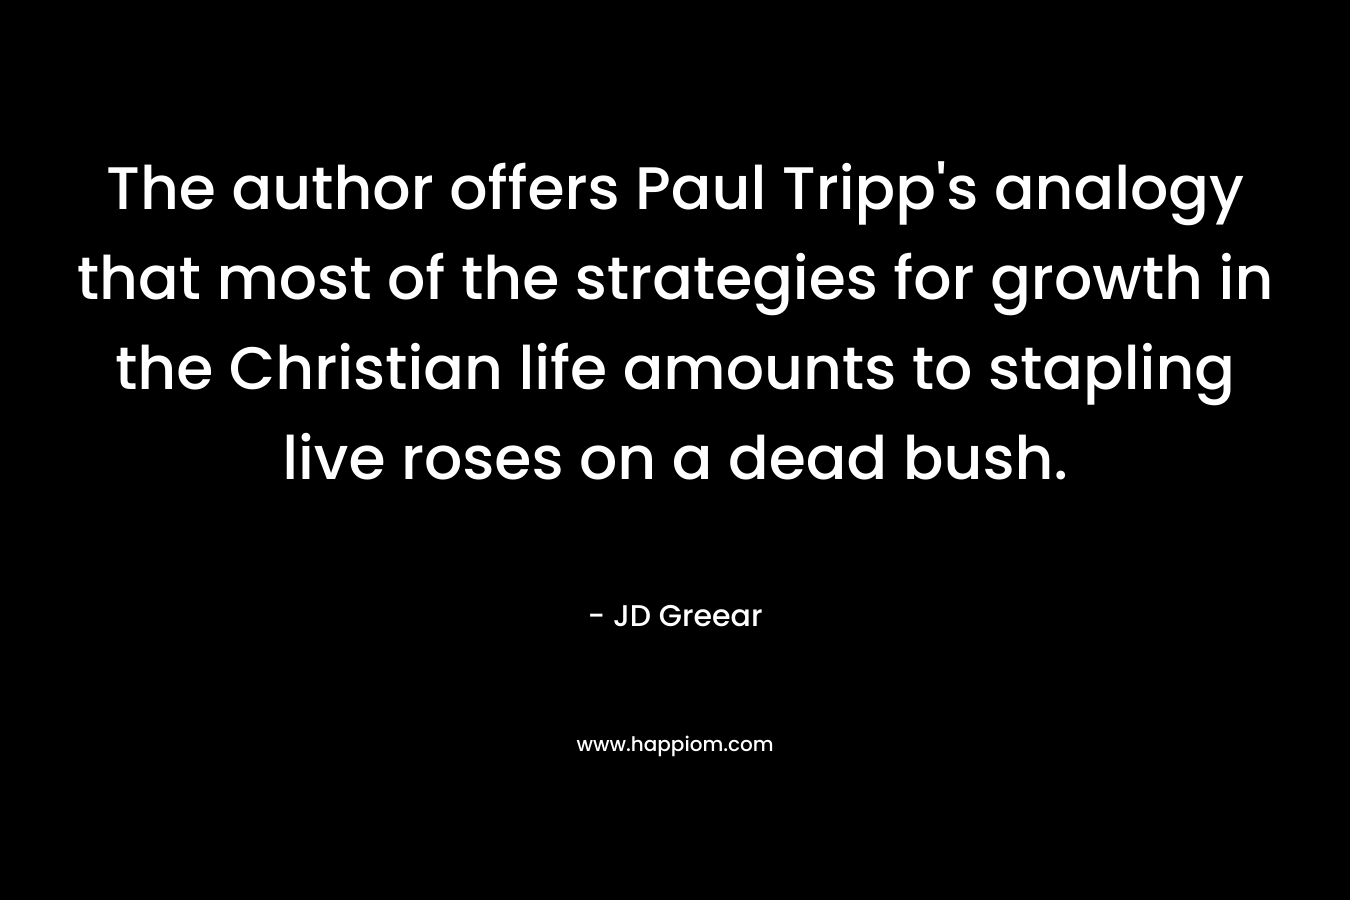 The author offers Paul Tripp’s analogy that most of the strategies for growth in the Christian life amounts to stapling live roses on a dead bush. – JD Greear